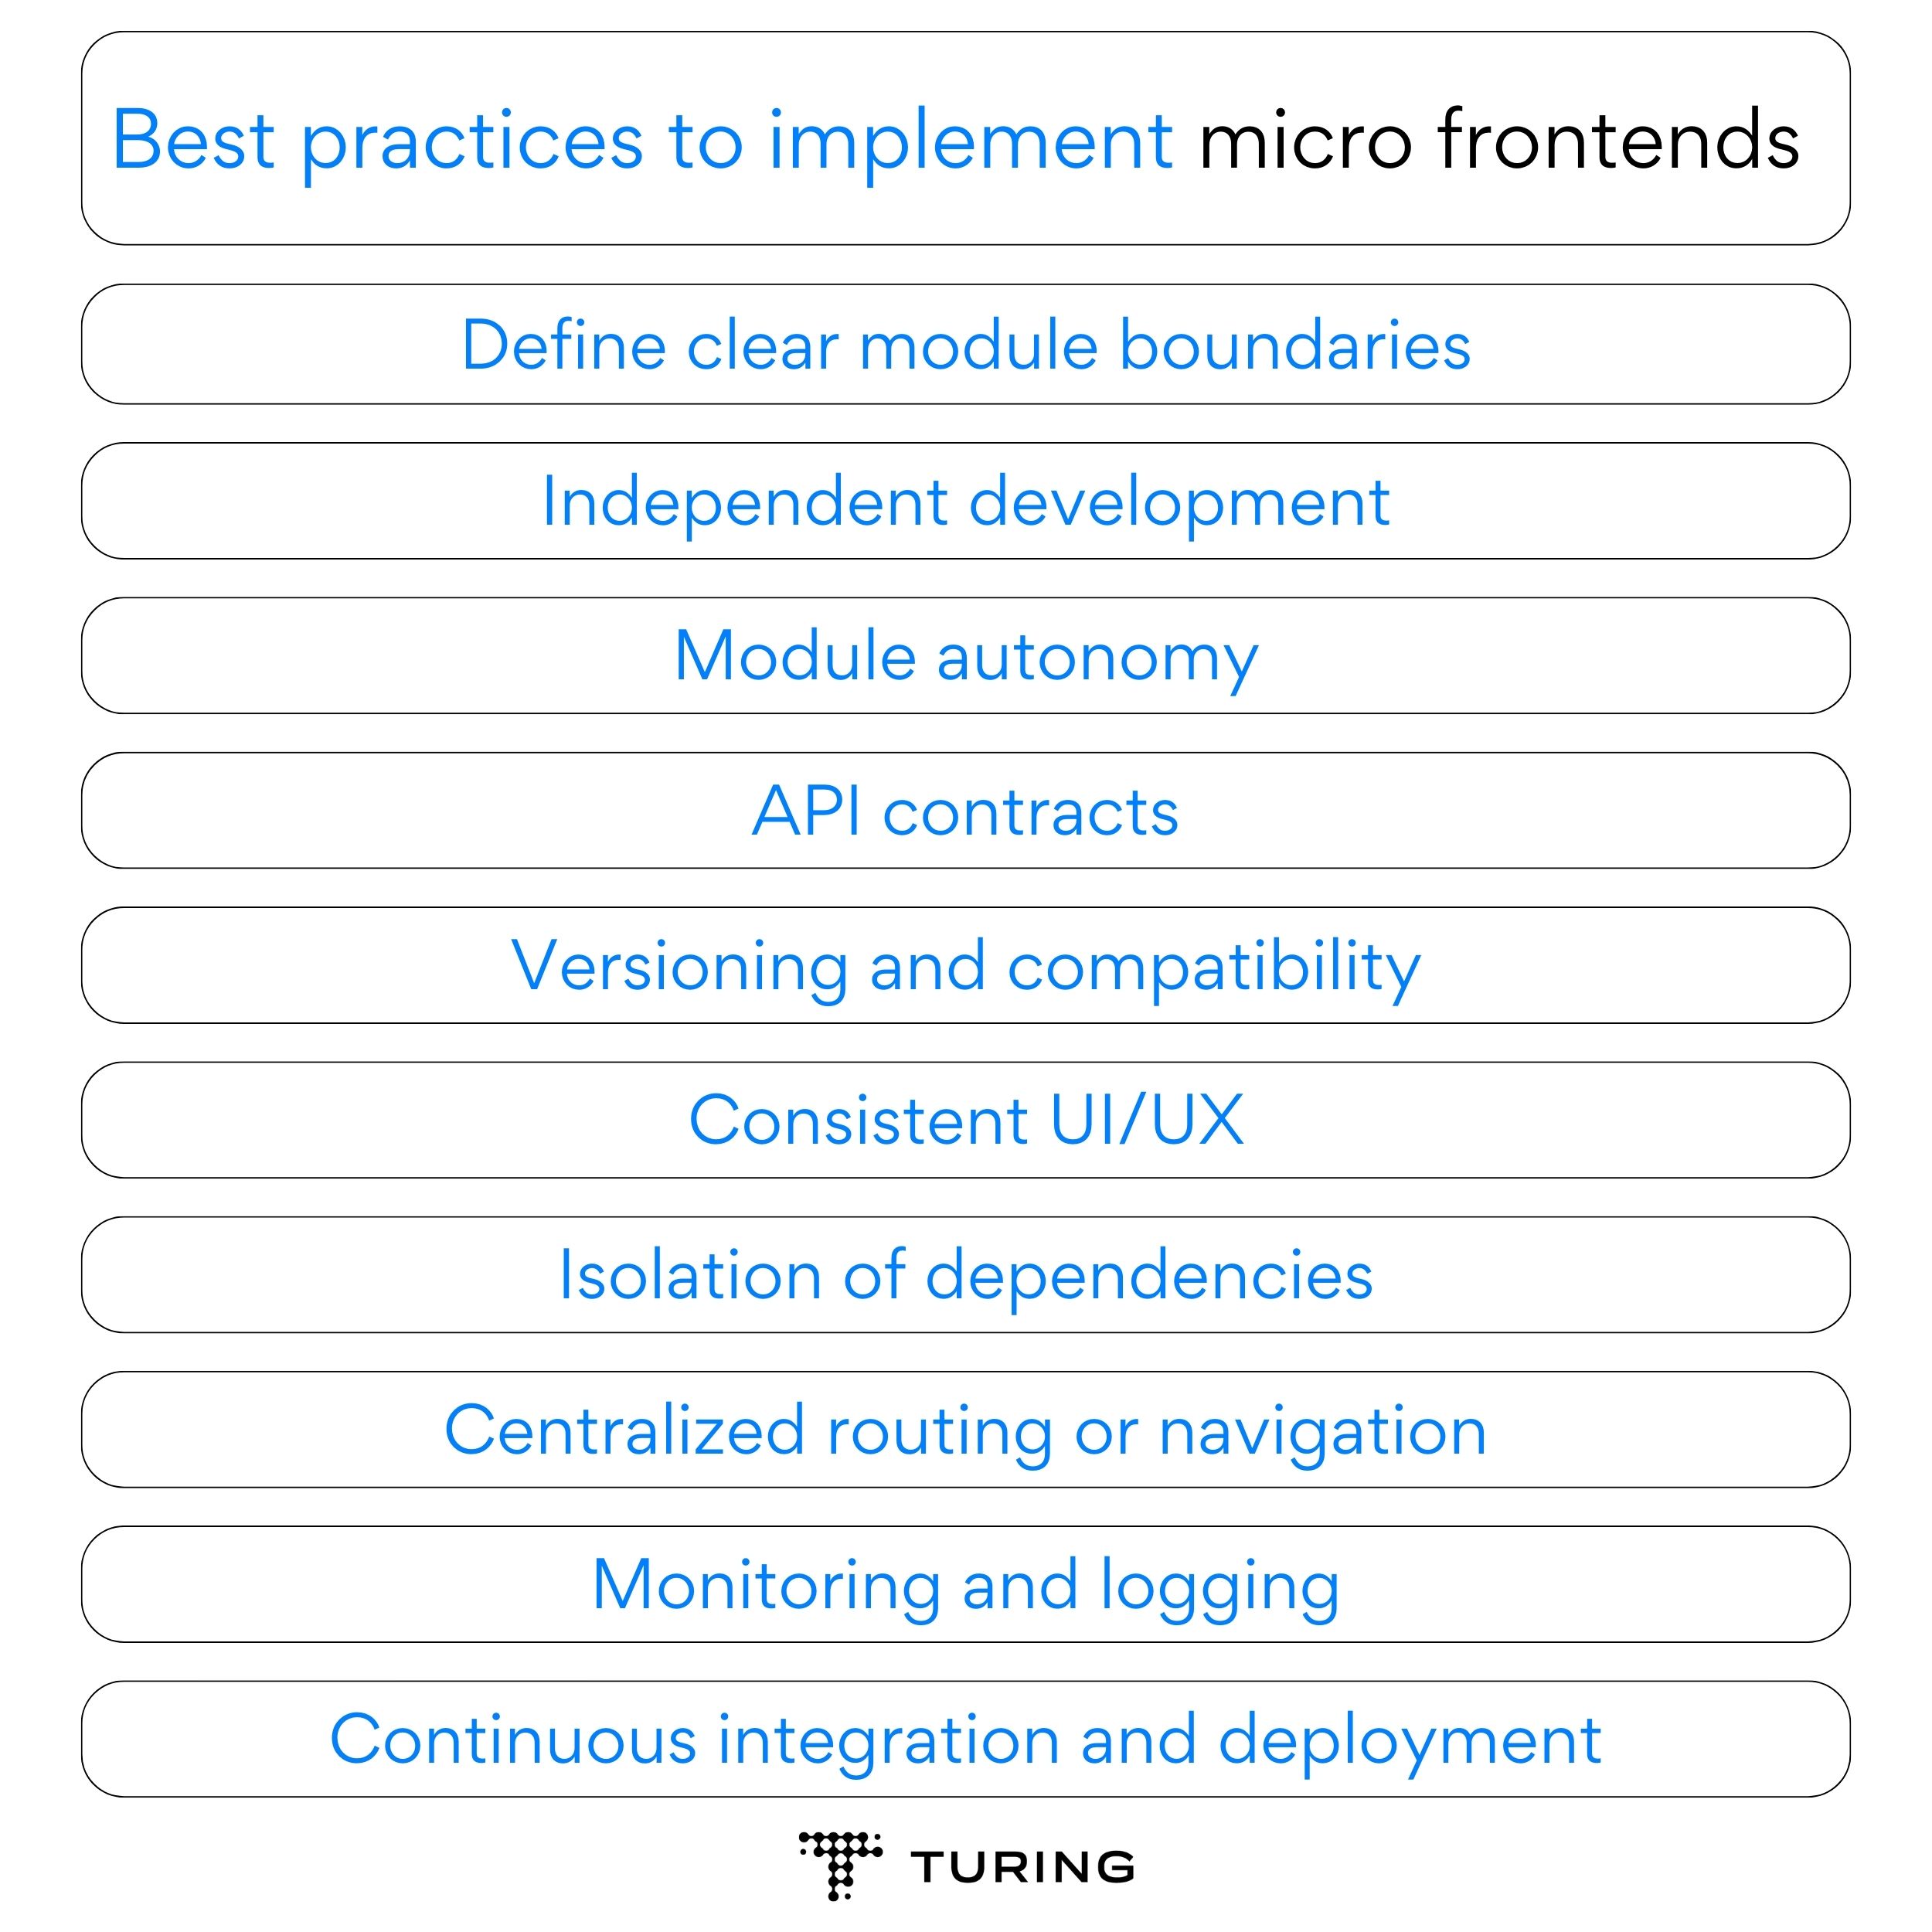 Best practices to implement micro frontends